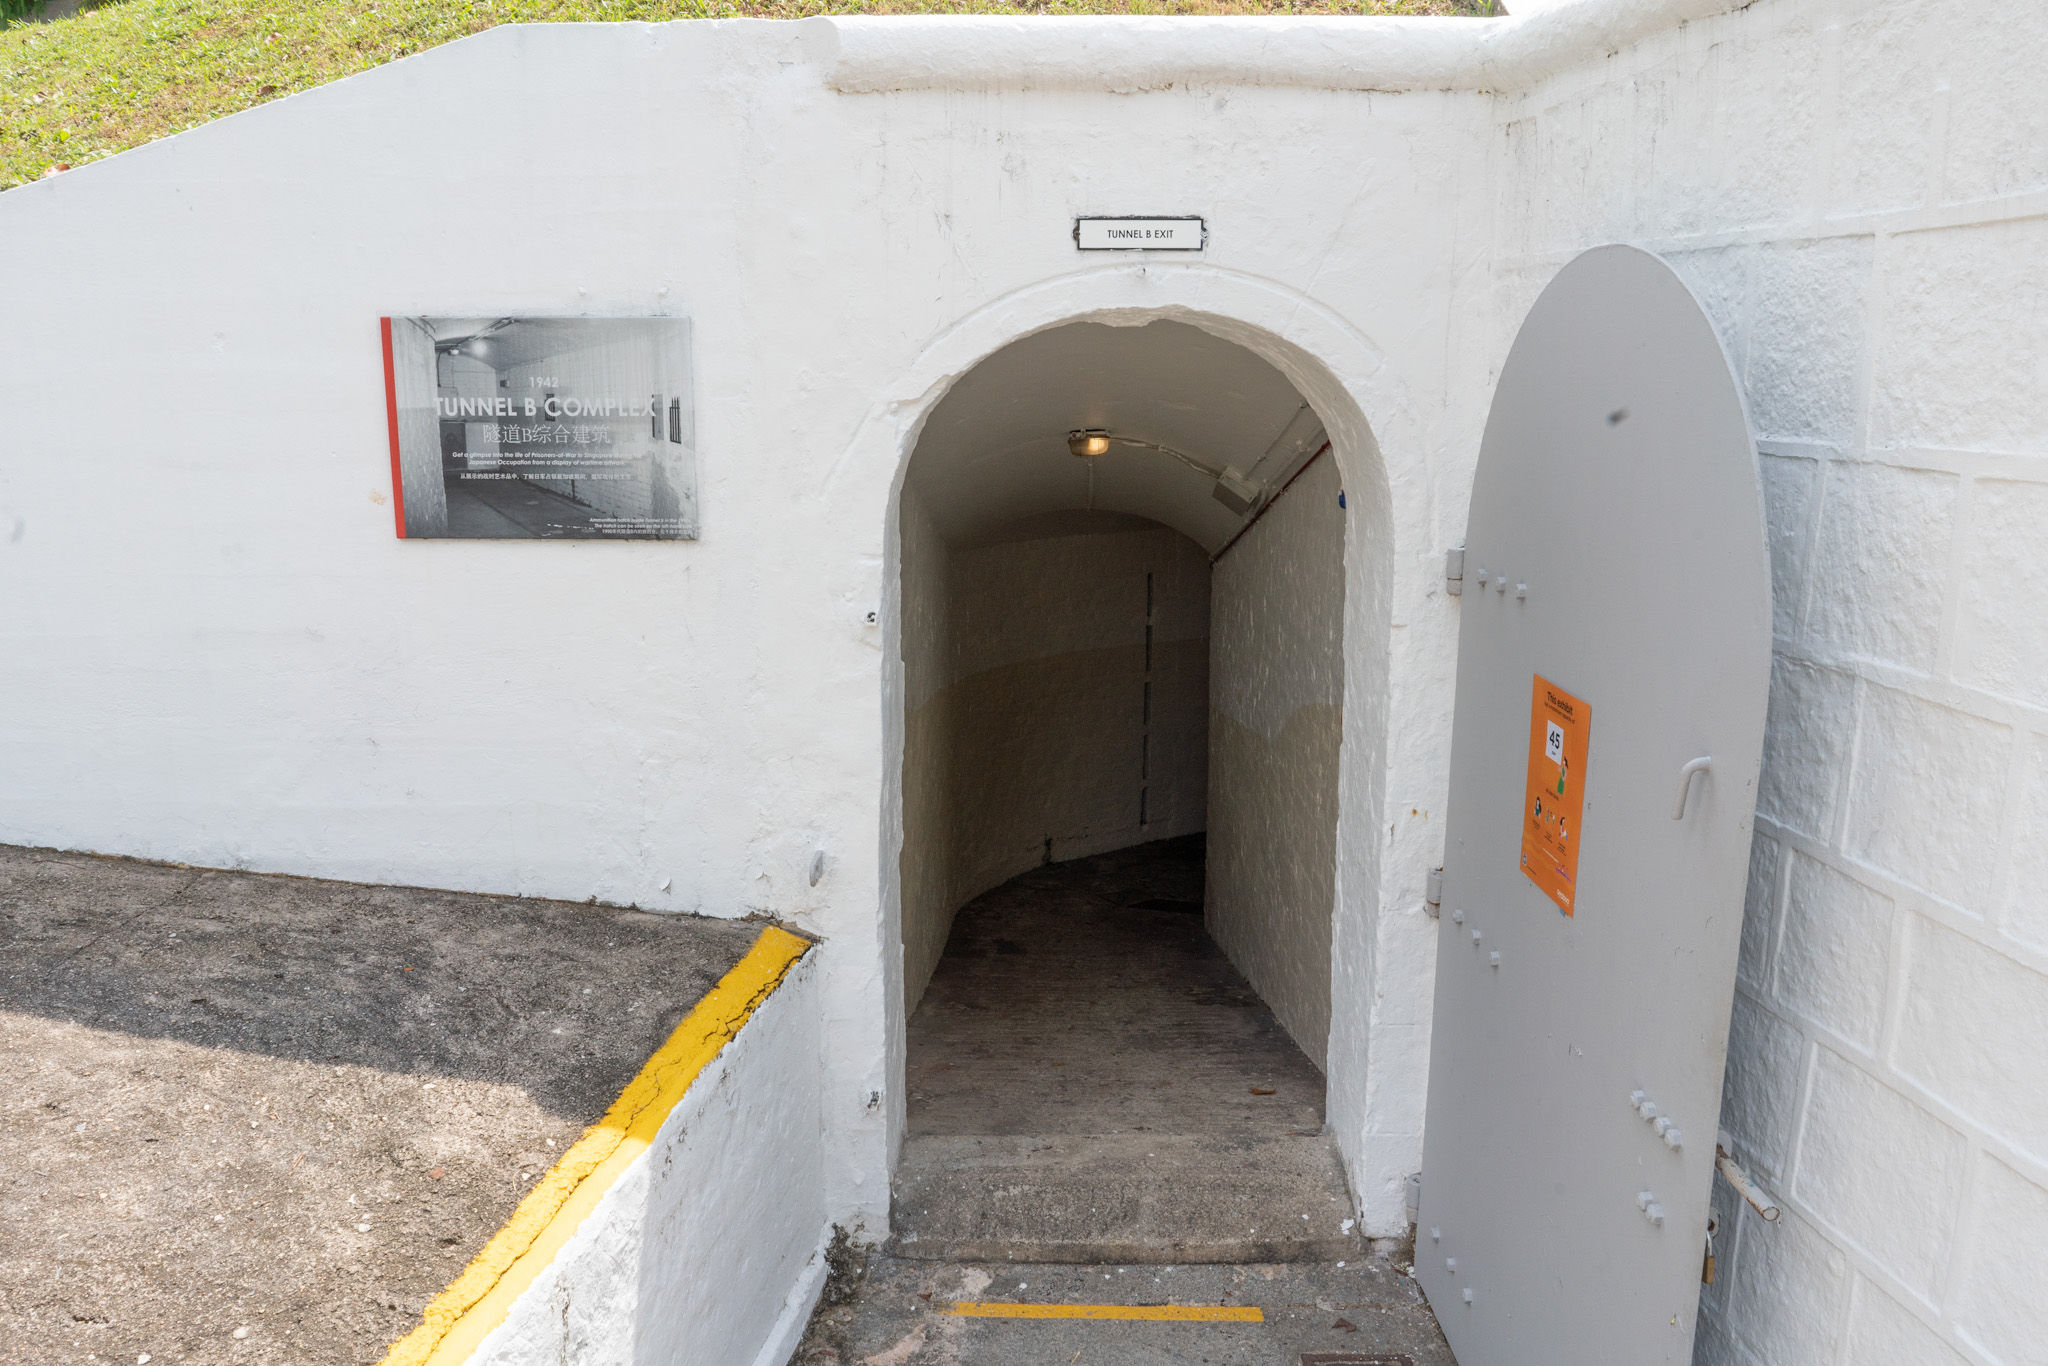 Tunnel B Complex (Image courtesy of National Heritage Board)